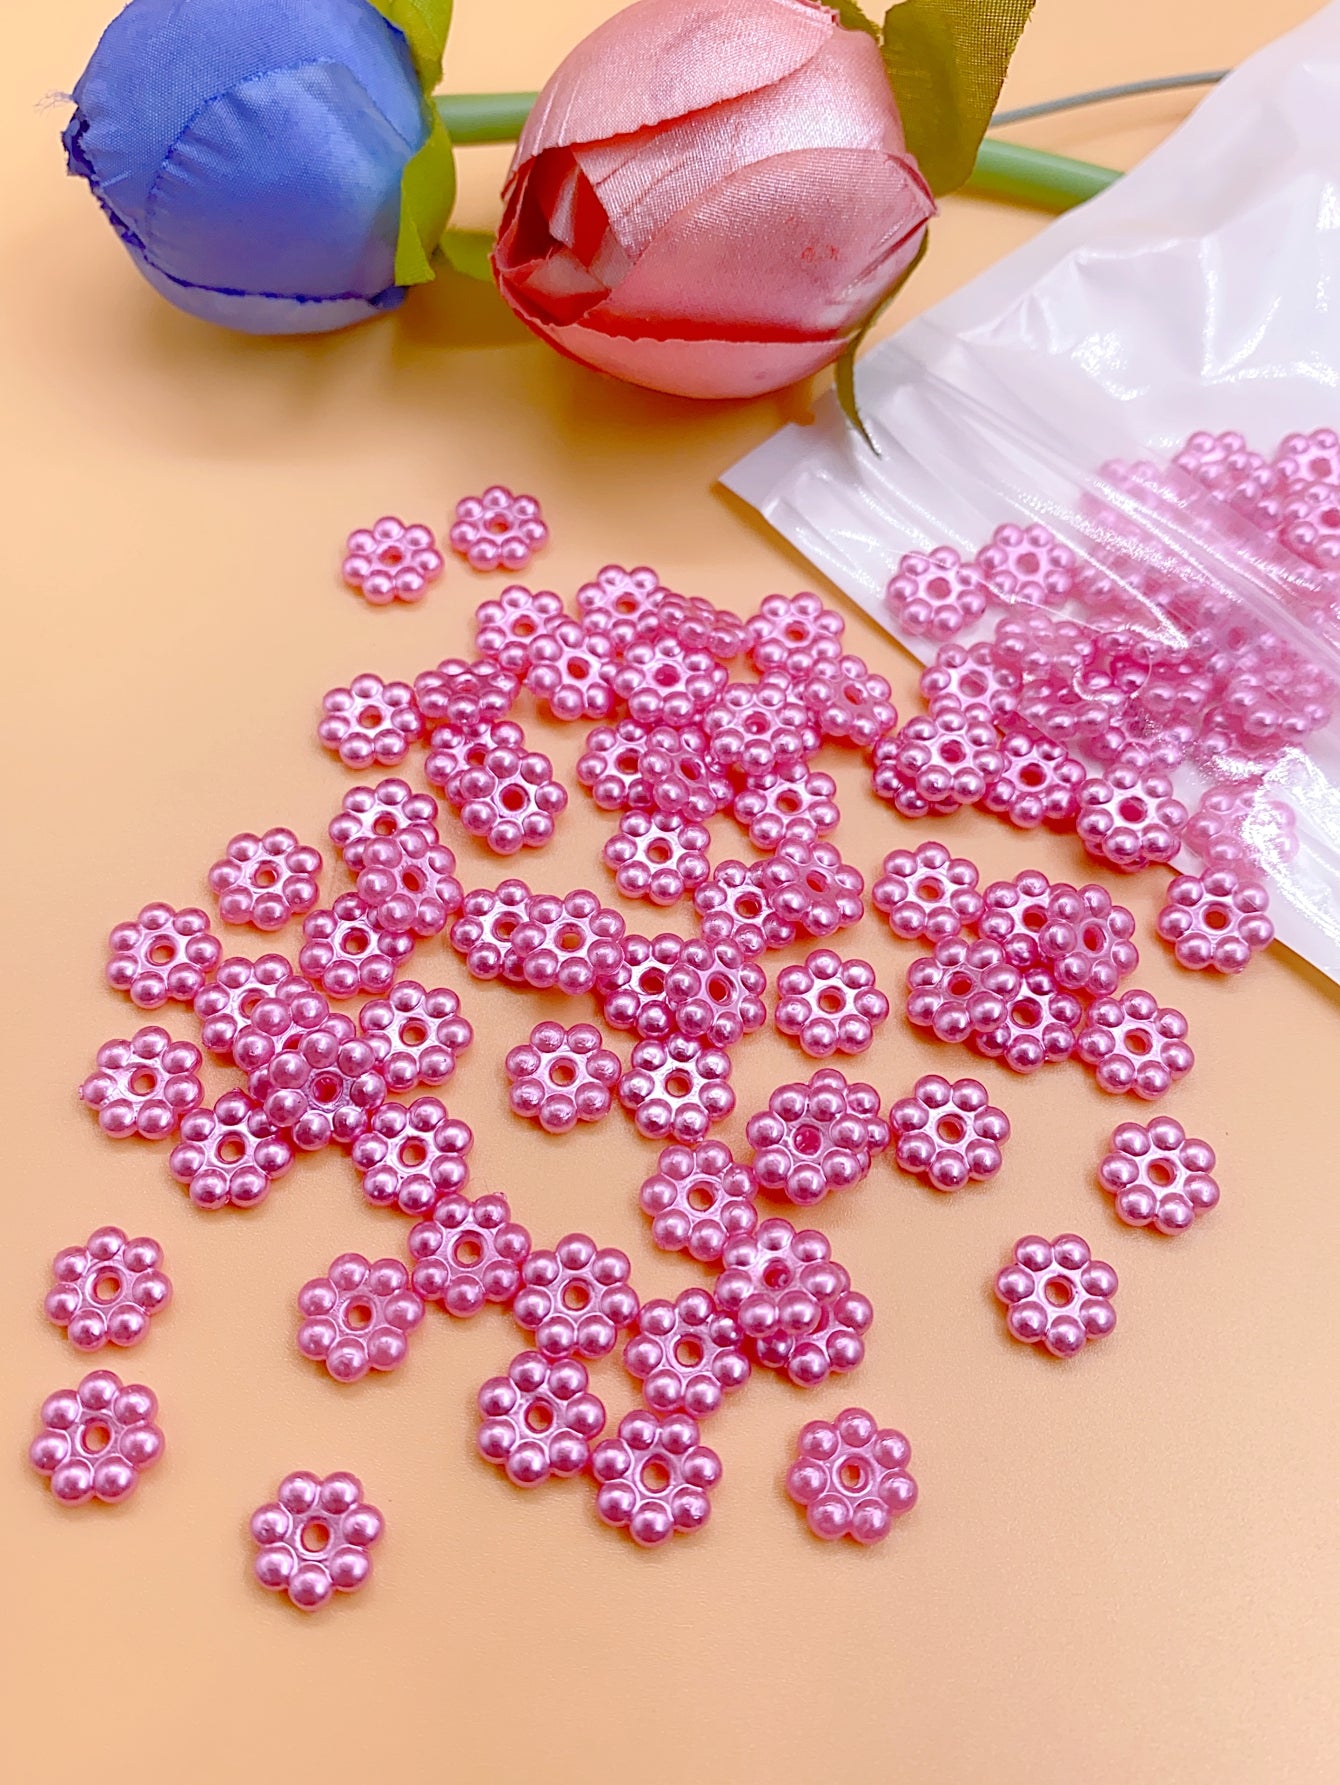 New abs imitation pearl 7 bead circle flat piece straight hole handmade beaded material diy clothing mobile phone case accessories patch pearl